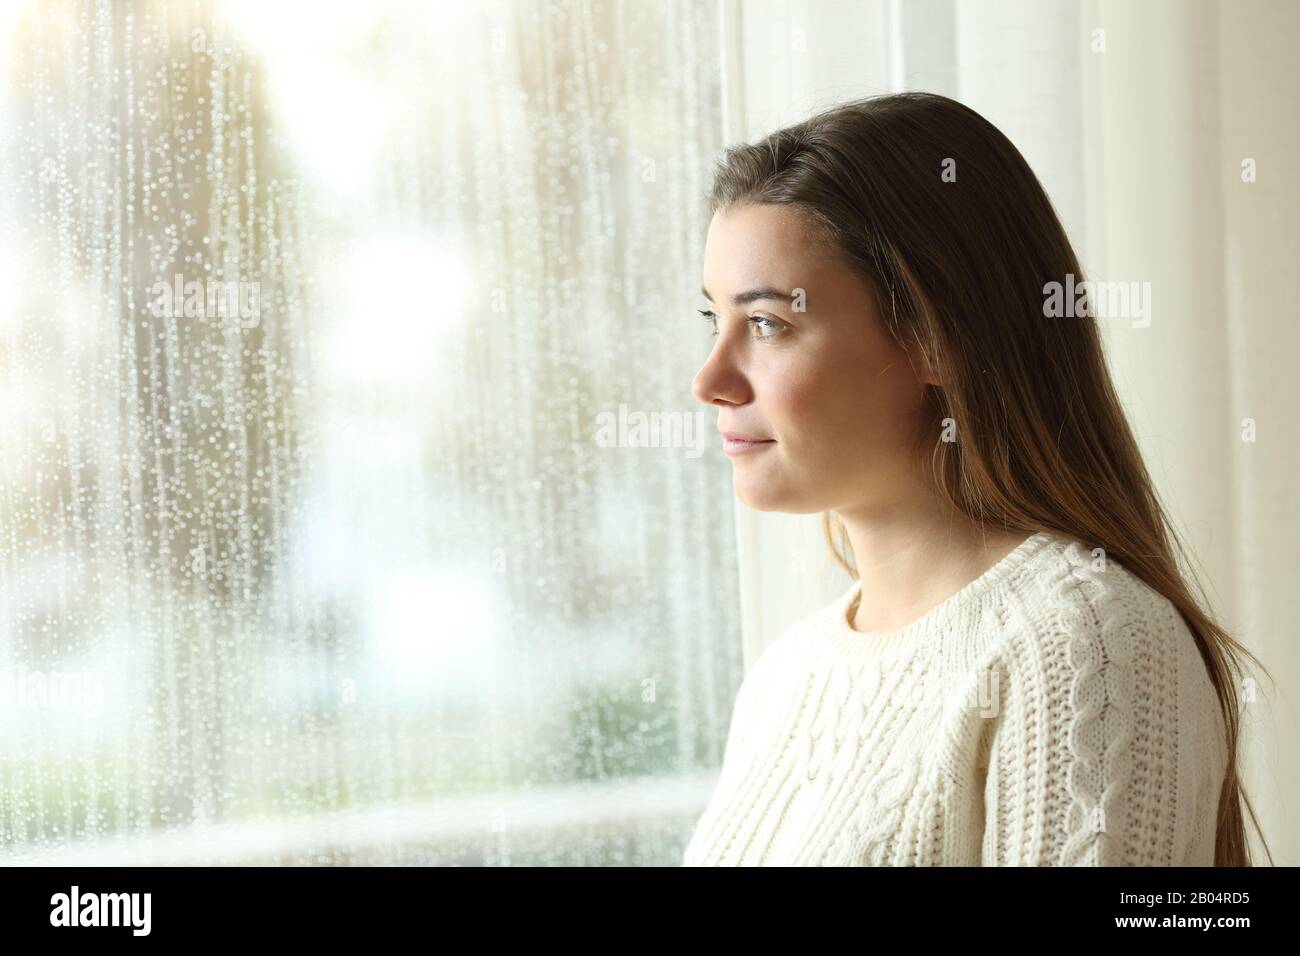 Side view portrait of a confident teen looking the rain through window Stock Photo